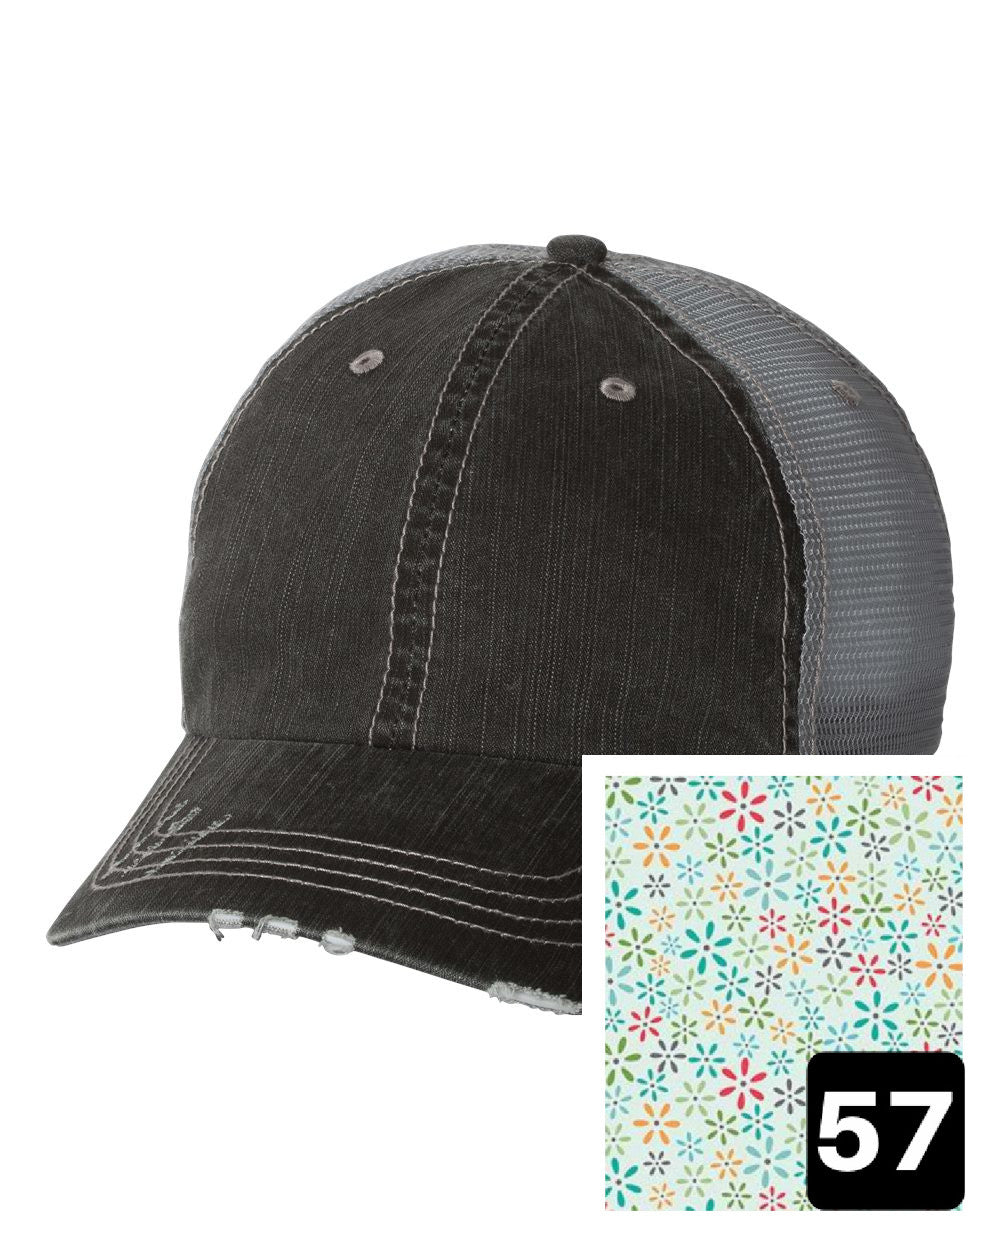 gray distressed trucker hat with white daisy on yellow fabric state of UP of Michigan